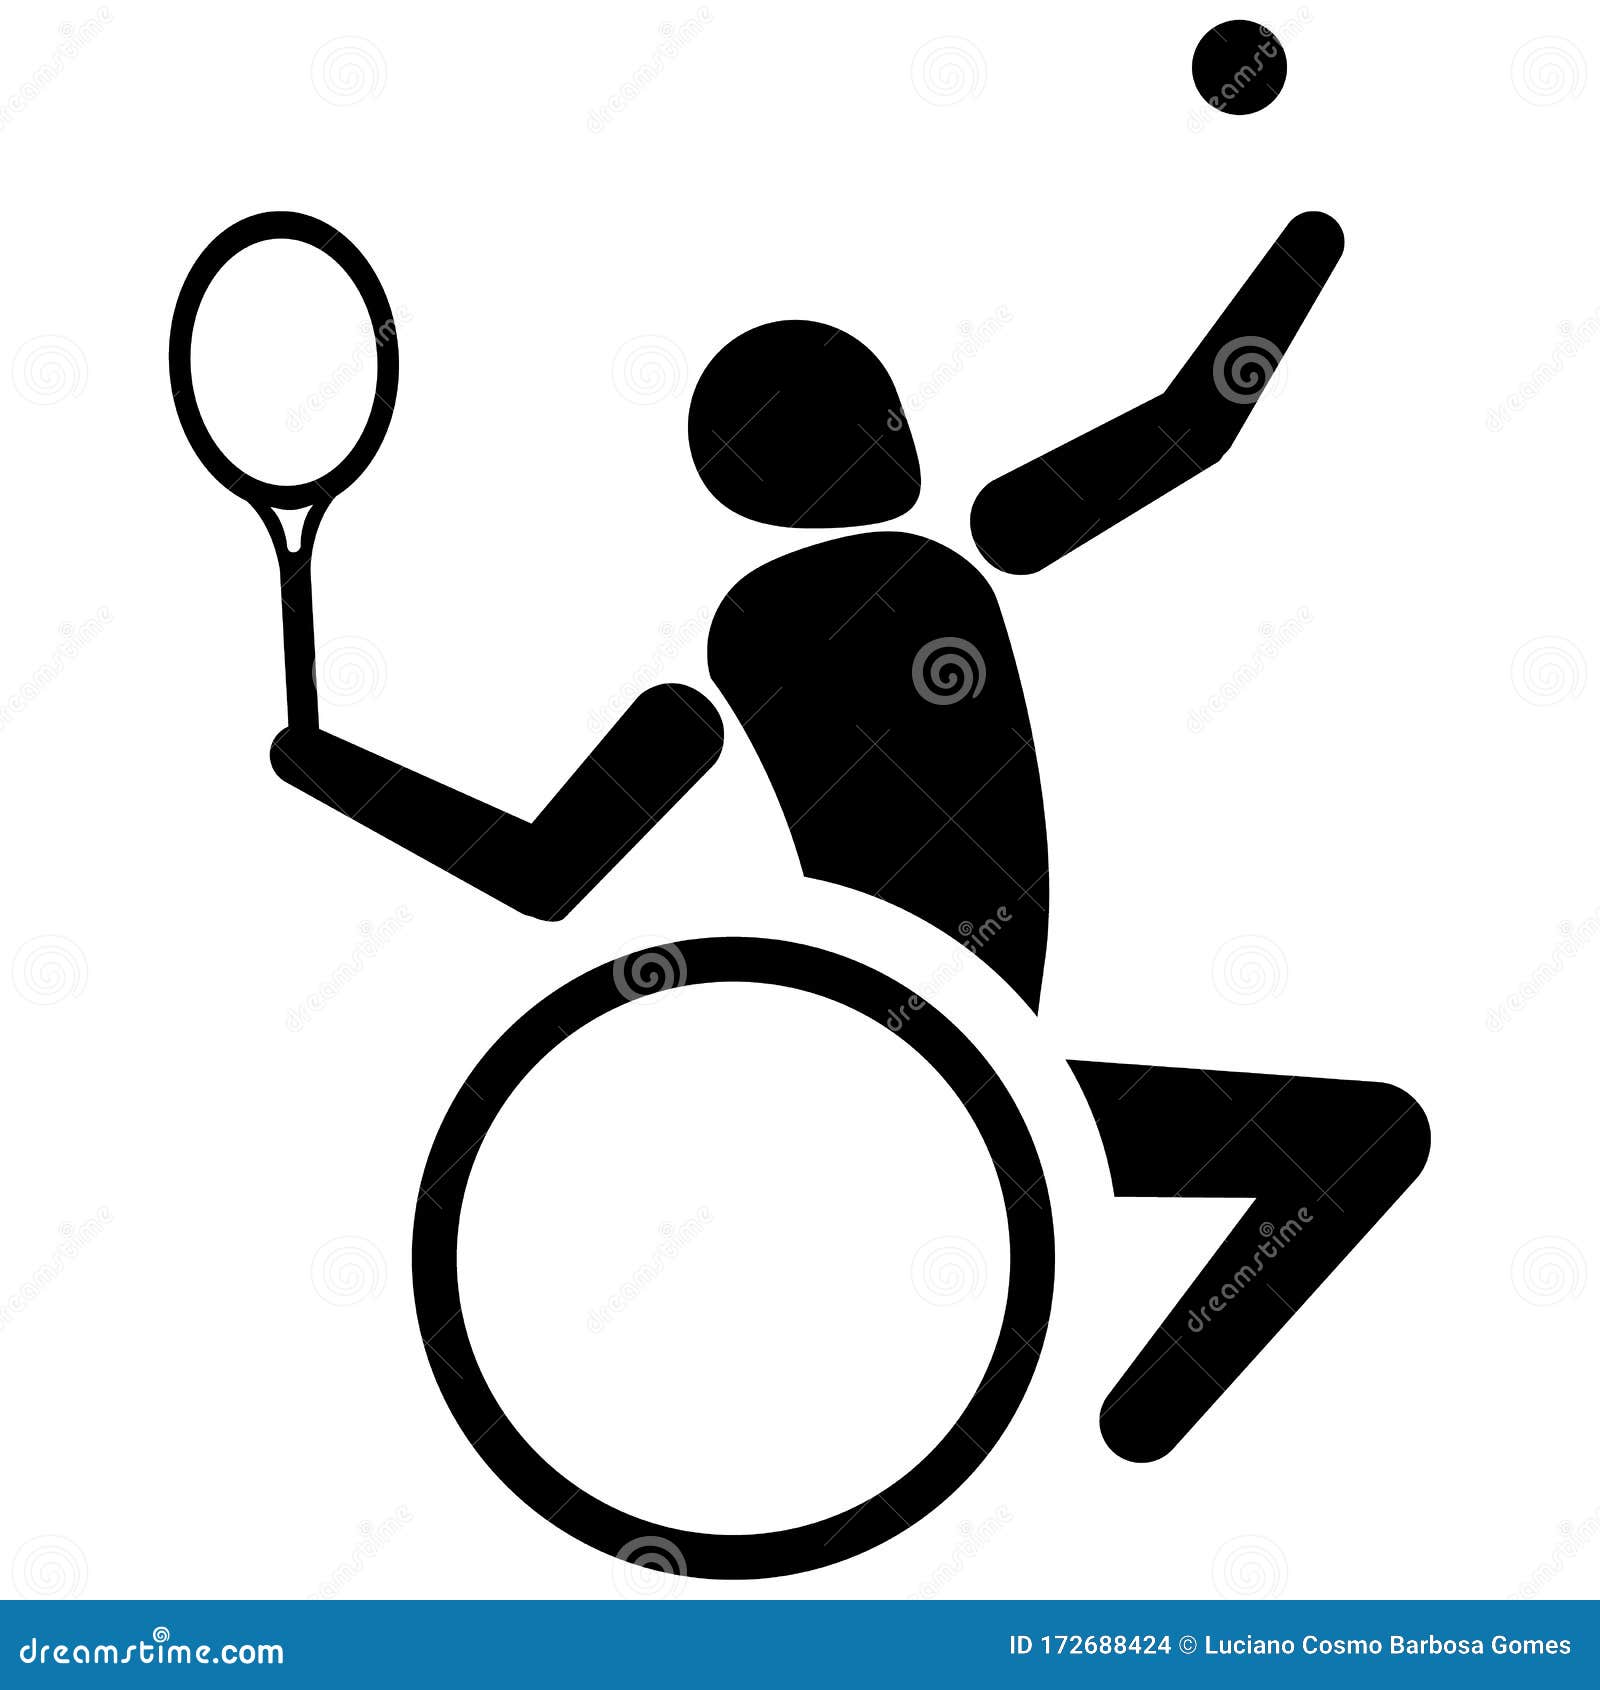 this is sport pictogram, tennis to wheelchair, games